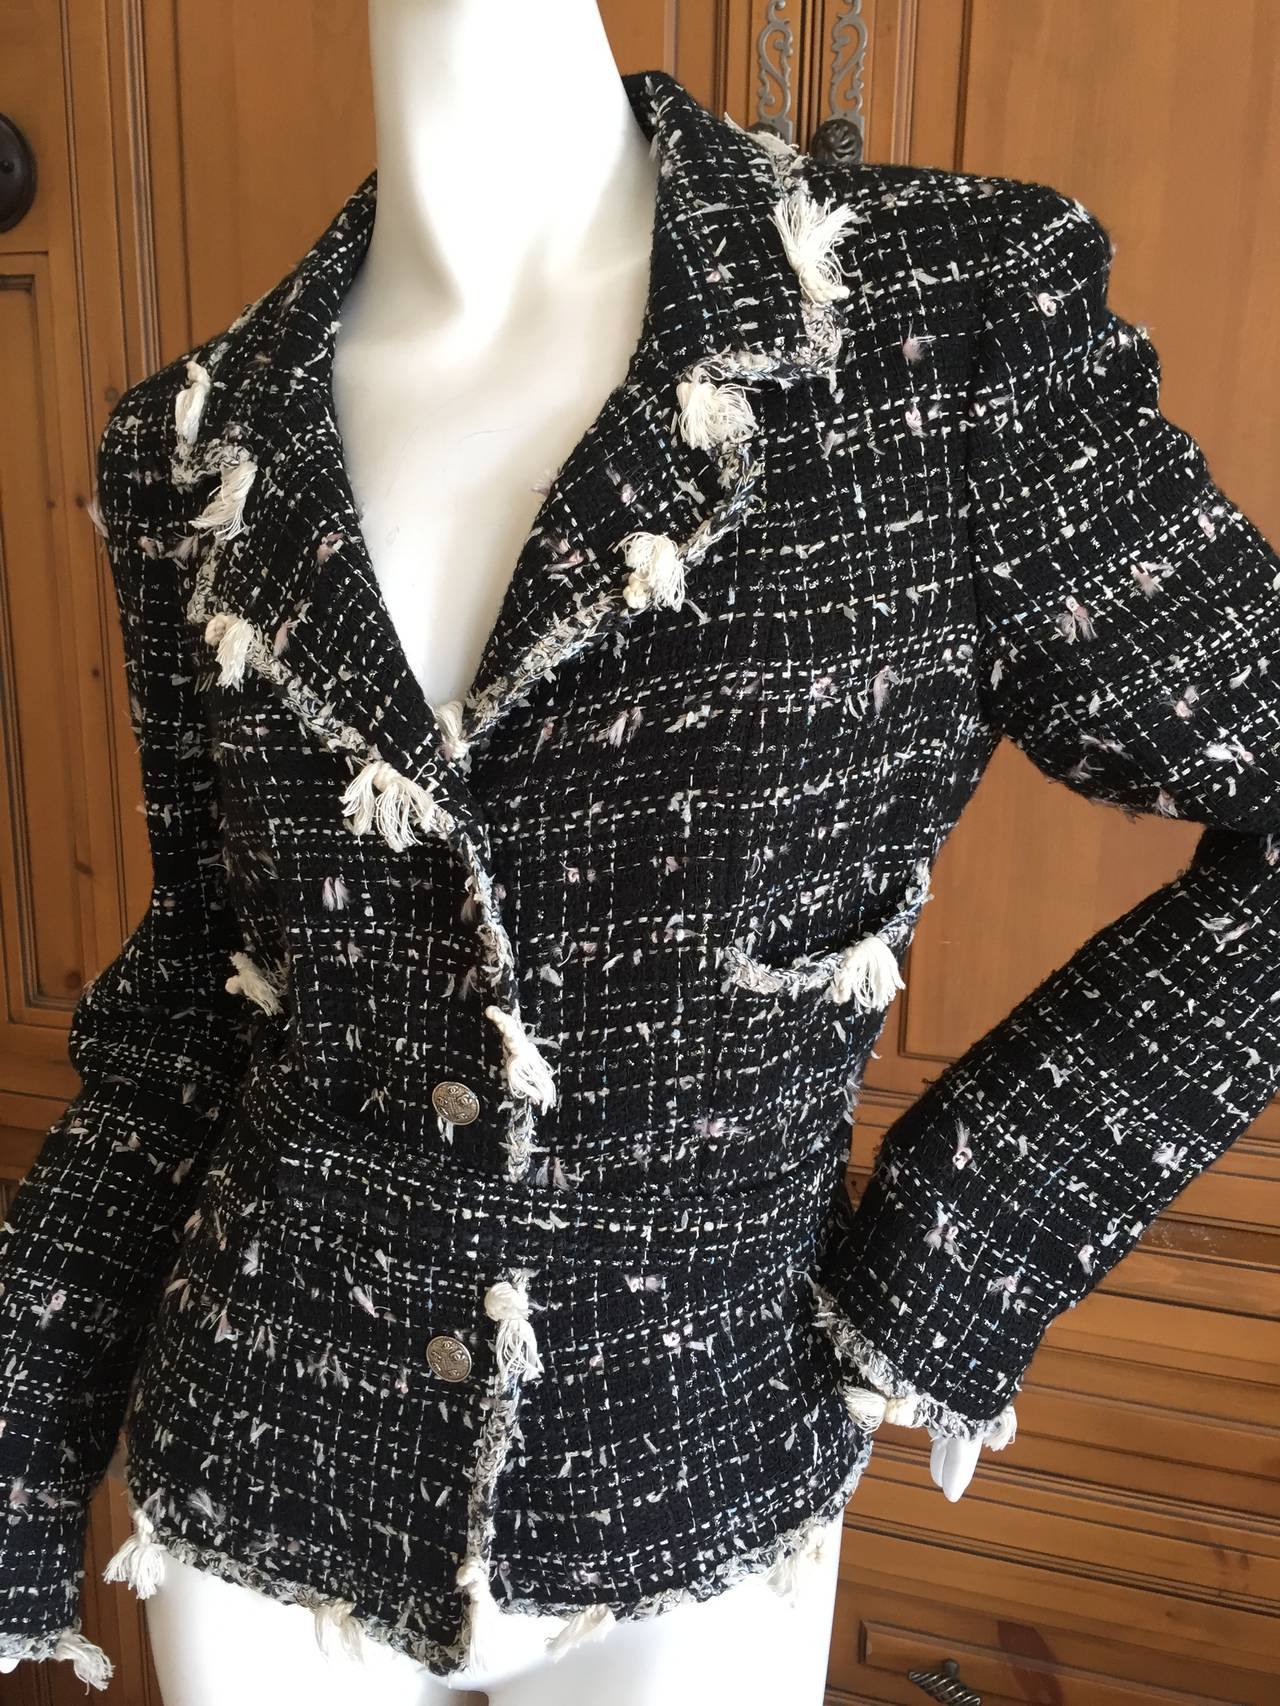 Classic Black Belted Jacket from Chanel.
2005 Cruise 
Size 42
Beautiful black and ivory fantasy tweed with fringed details.
Lined in luxurious camelia patterned silk with a chain weighted hem.
Silver buttons including 3 on each cuff.
The